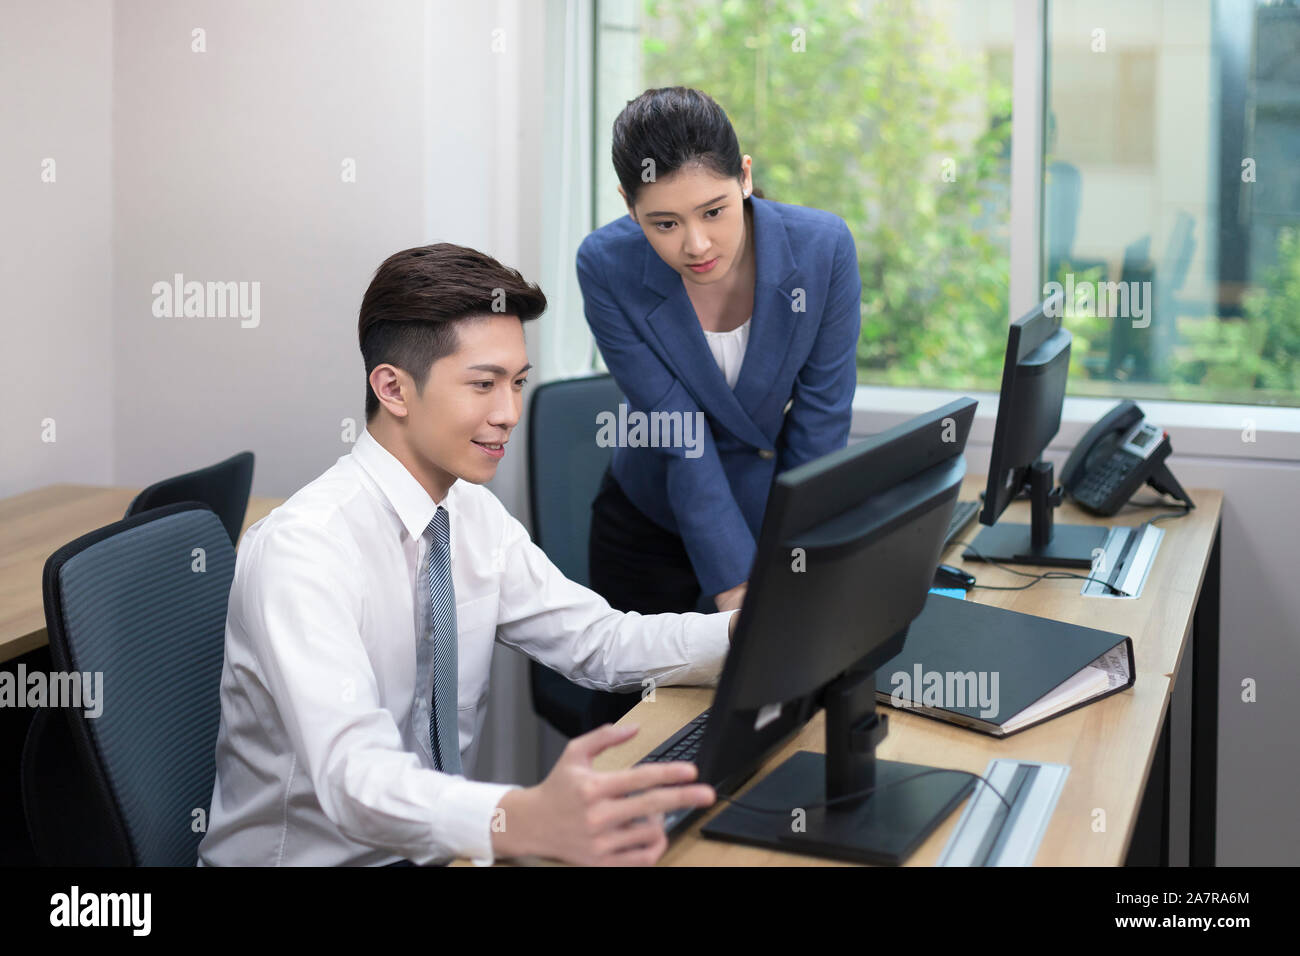 Two smiling young male and female businesspeople looking at a computer monitor of one of them while working together at a desk in an office Stock Photo